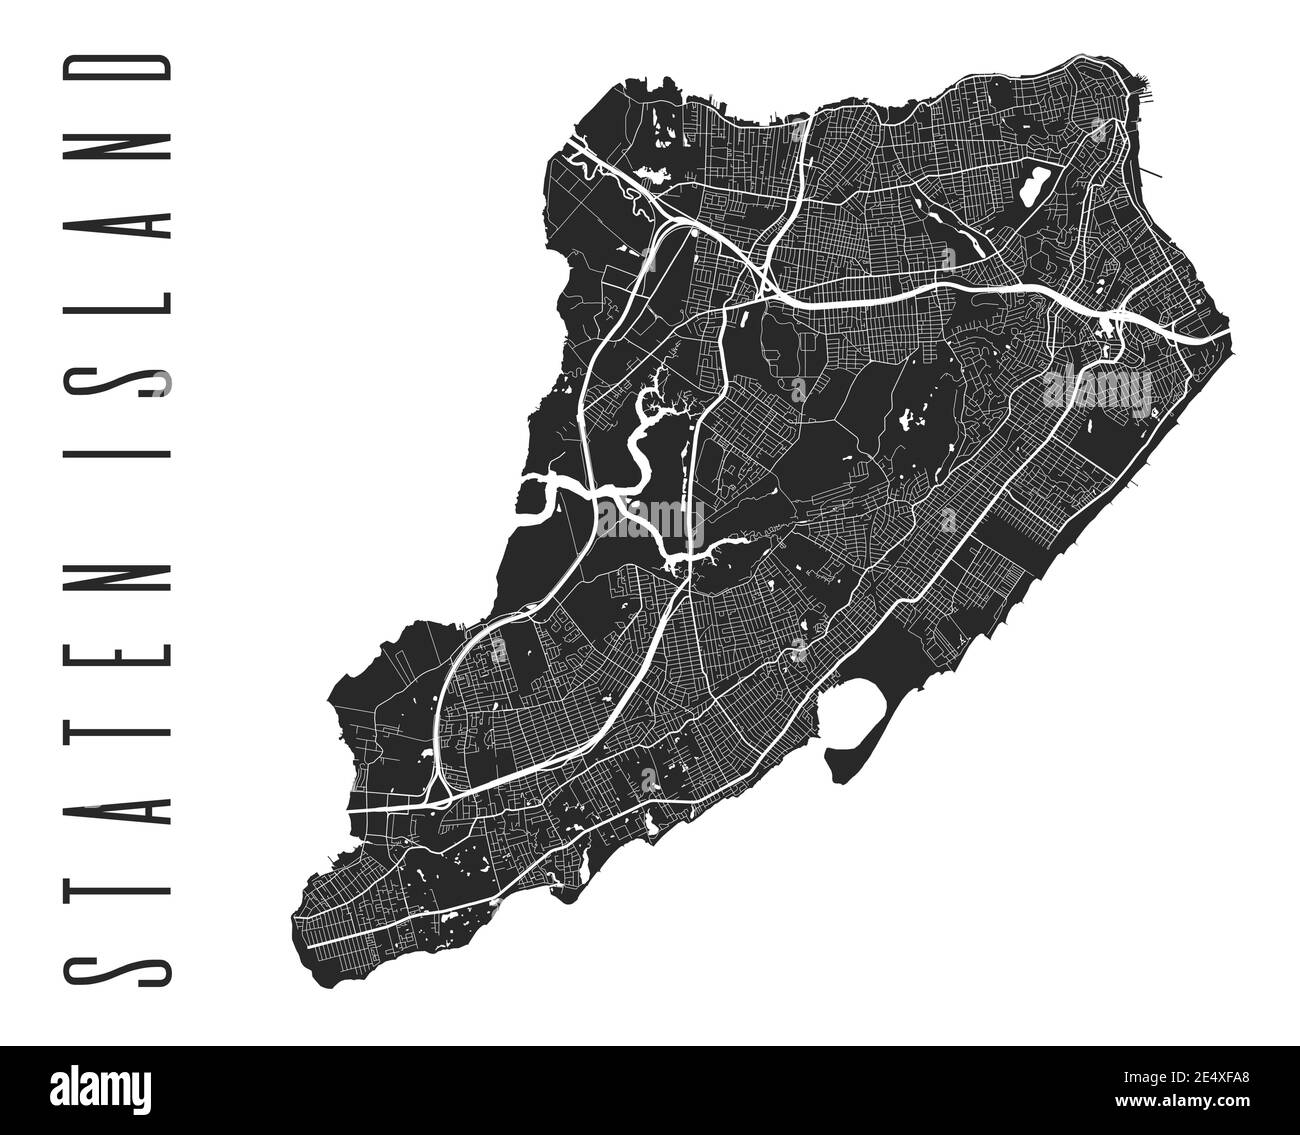 Staten Island map poster. New York city borough street map. Cityscape aria panorama silhouette aerial view, typography style. St George, Tompkinsville Stock Vector